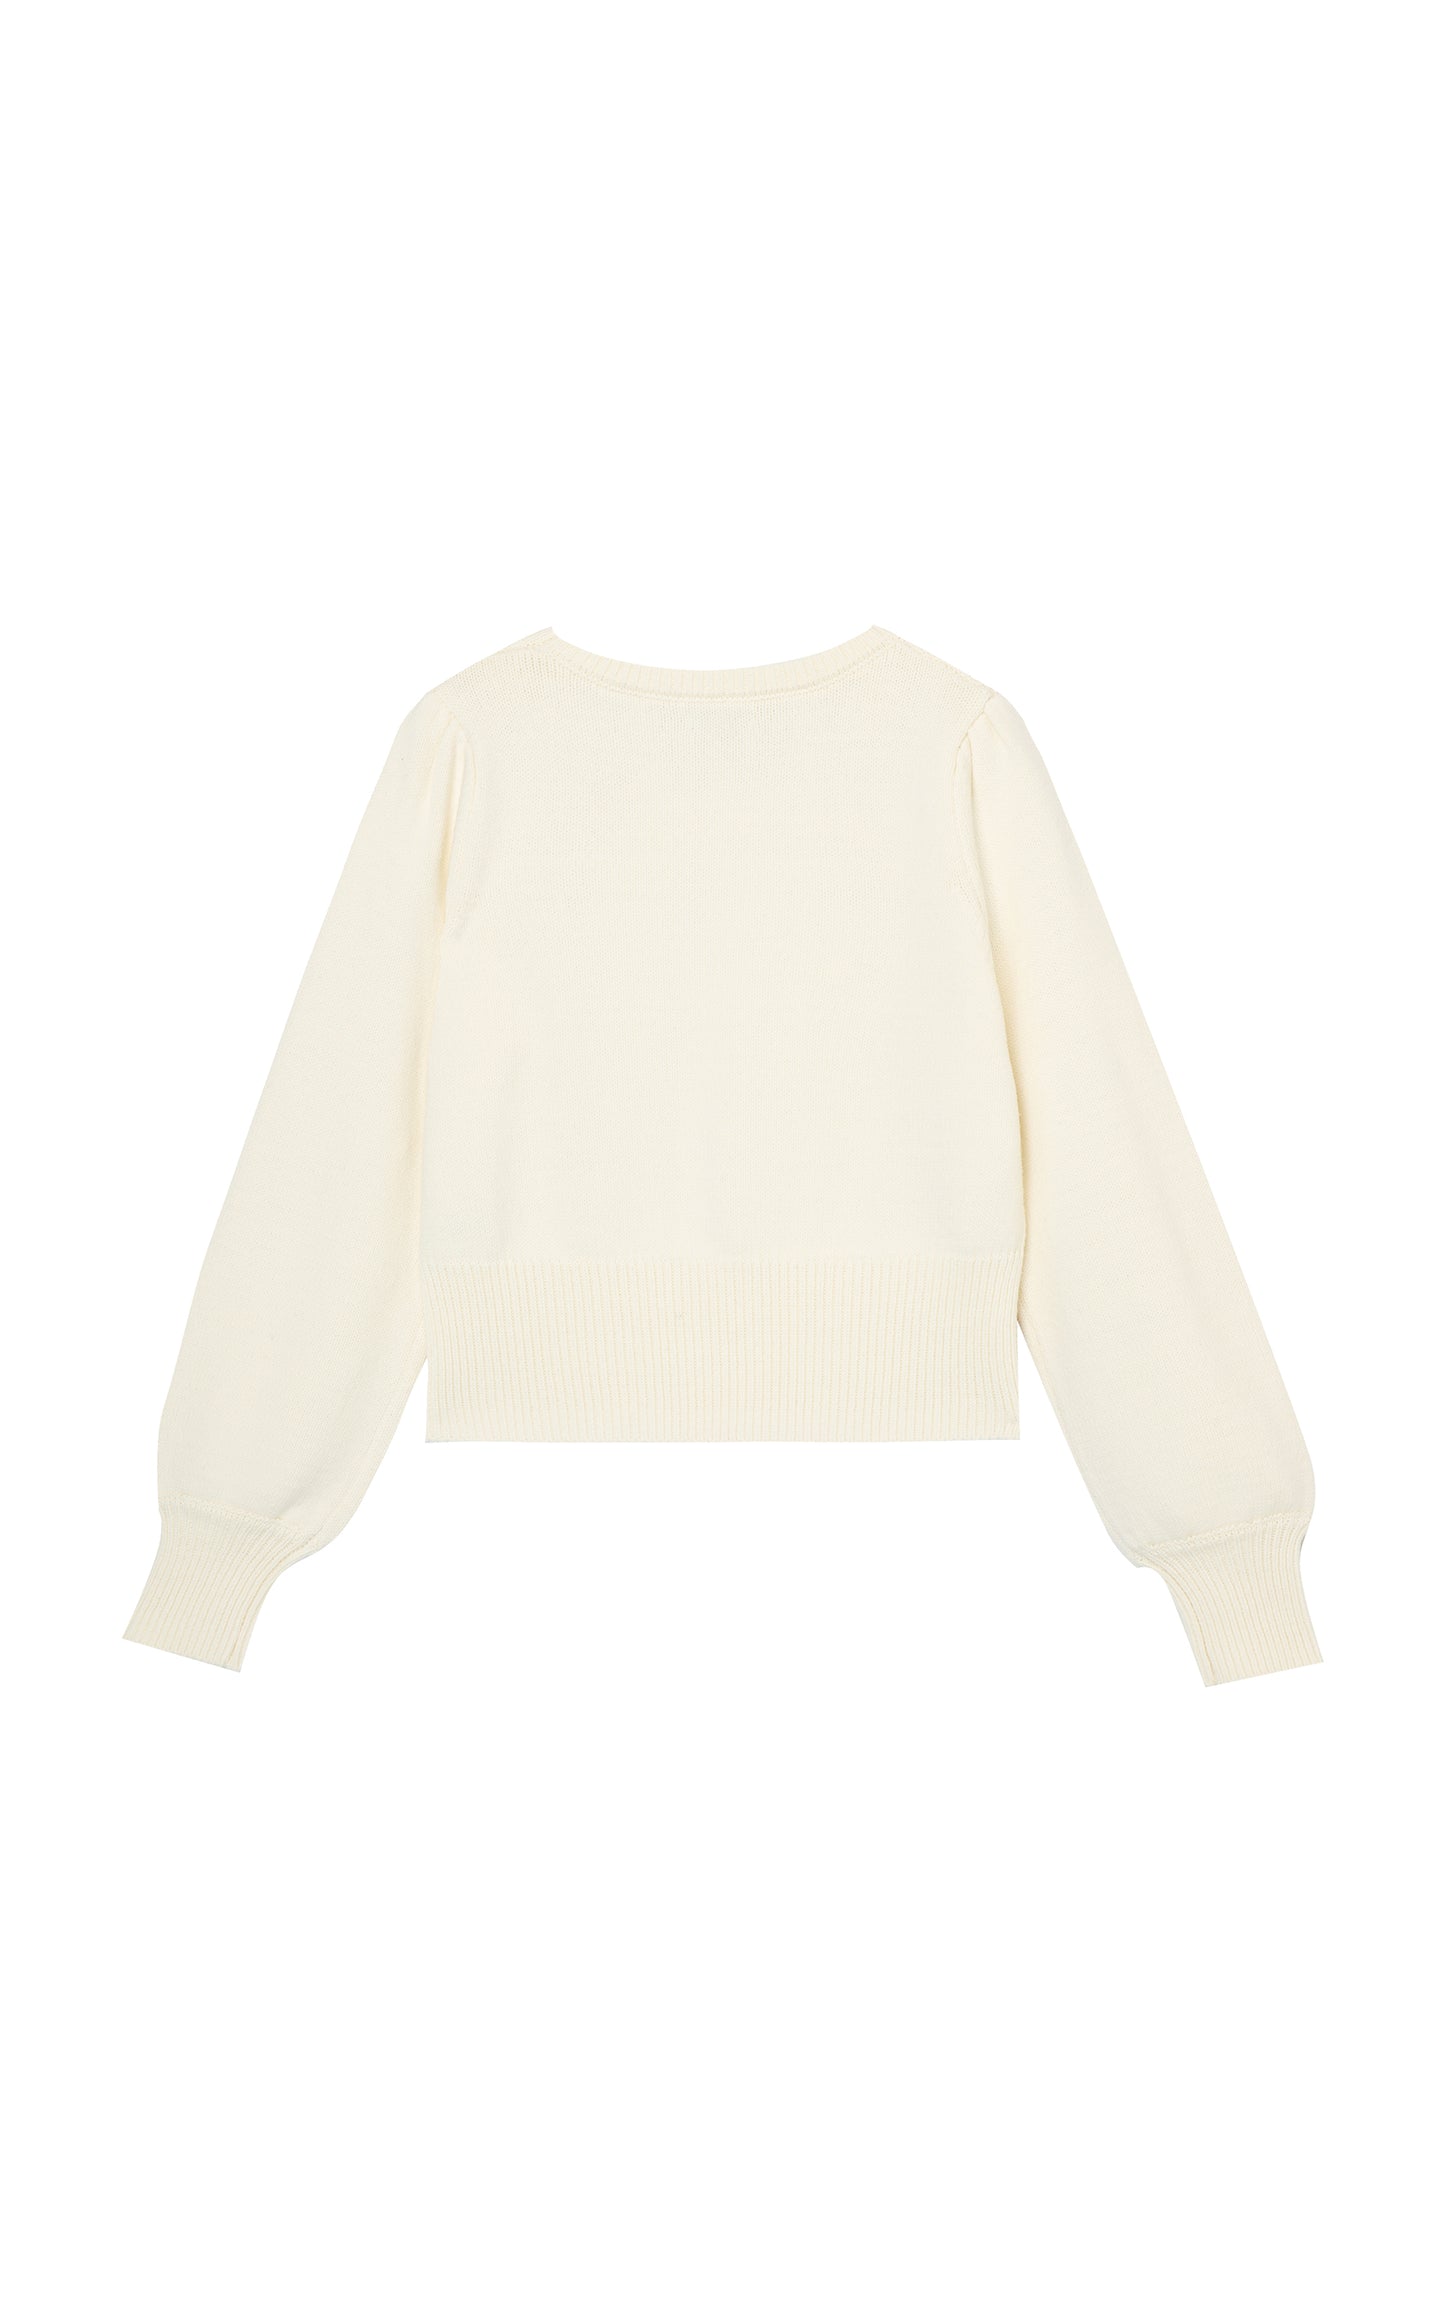 Back view of an off-white cable-knit sweater with fringe detailing